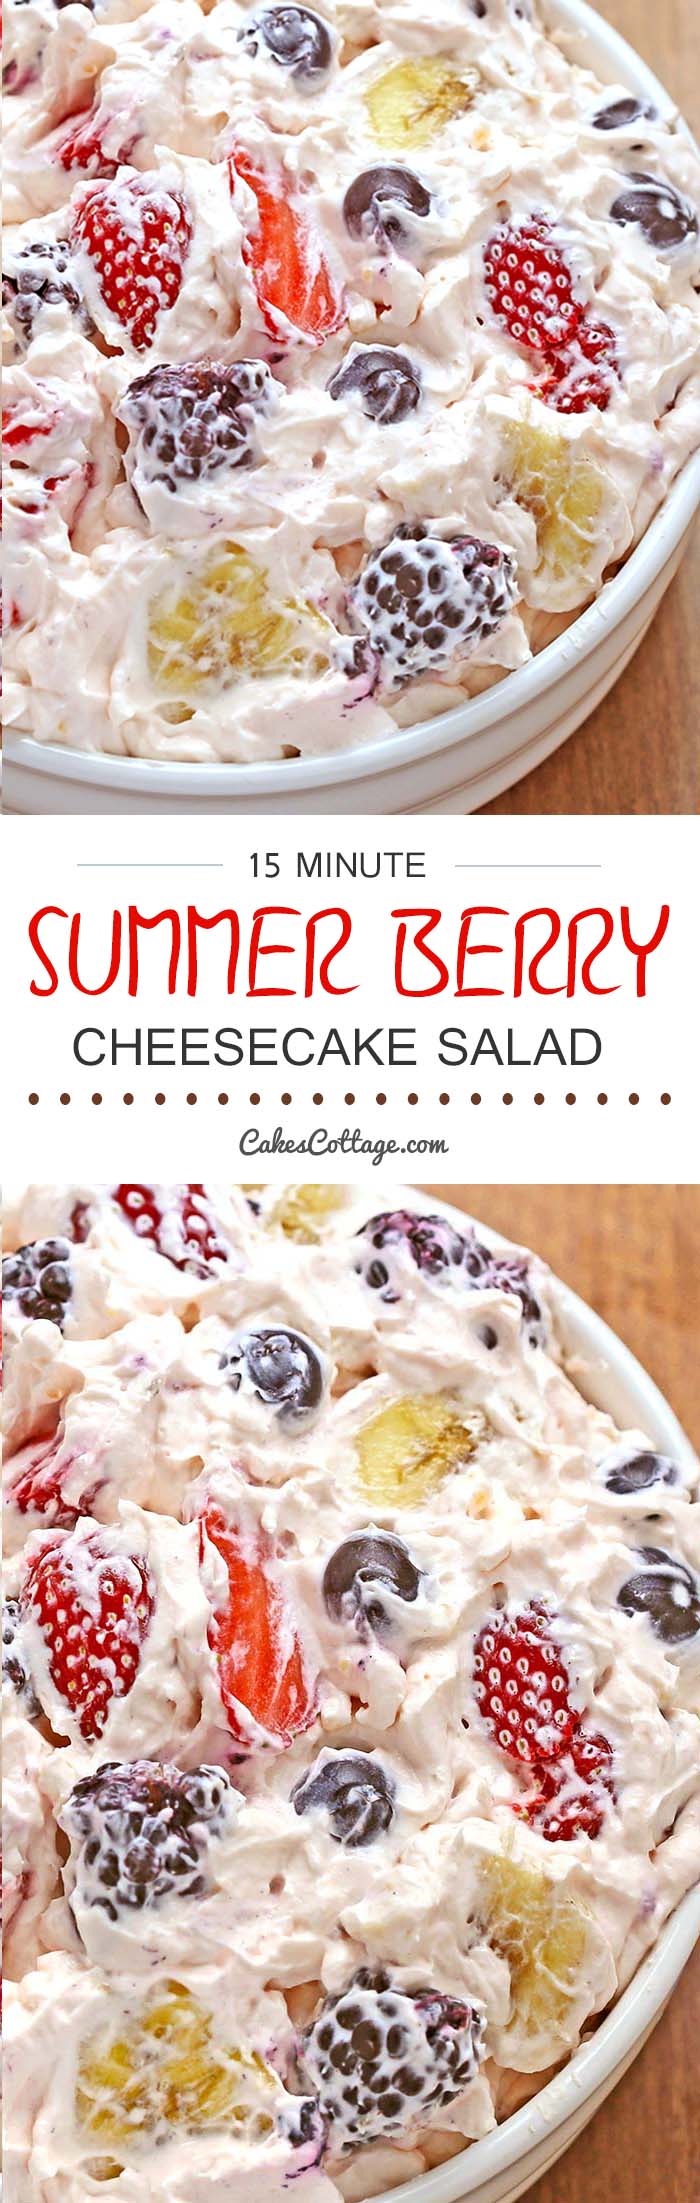 Summer Berry Cheesecake Salad - delicious, absolutely loaded with berries tossed in a thick, rich and creamy cheesecake mixture, a must have for all picnics, BBQ's, potlucks, and family get-togethers...